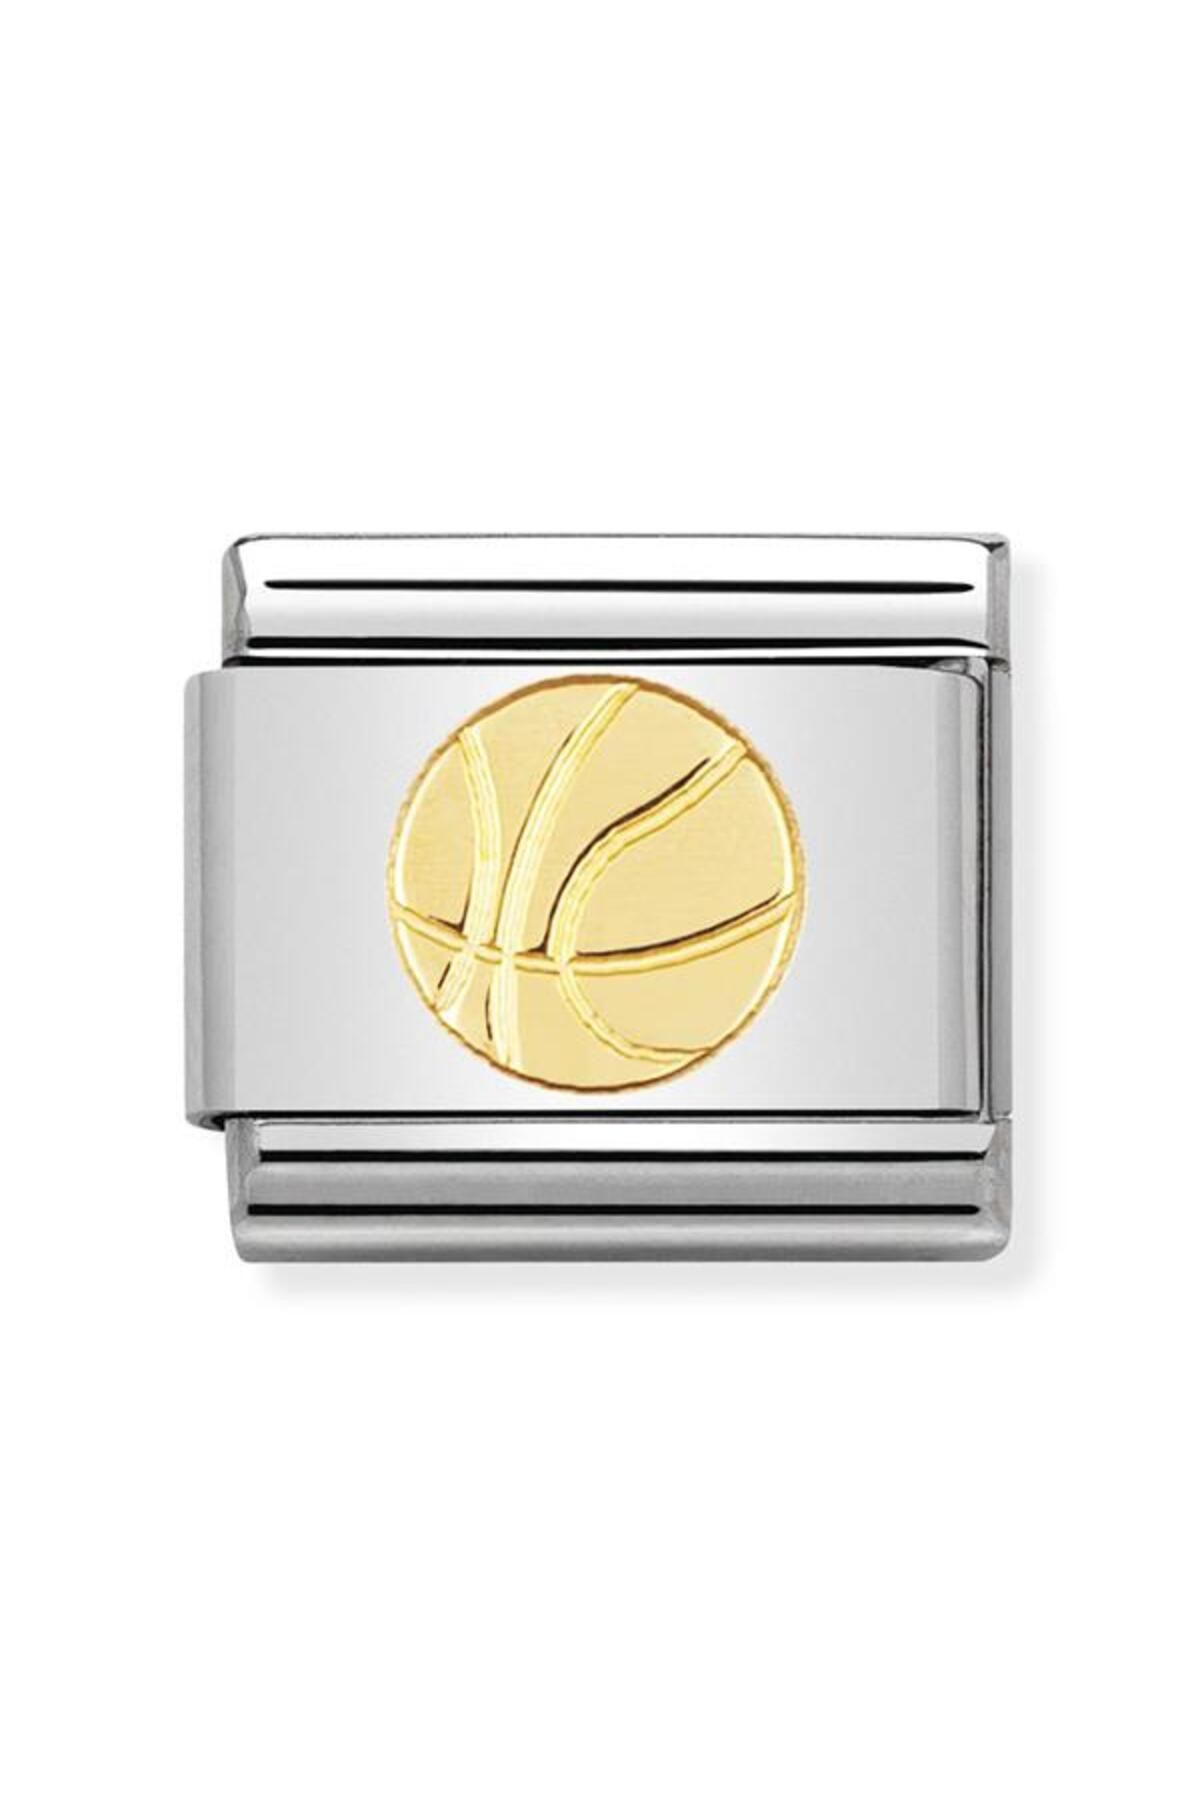 NOMİNATİON Composable Classic Sports In Stainless Steel With 18k Gold (12_basket Ball)